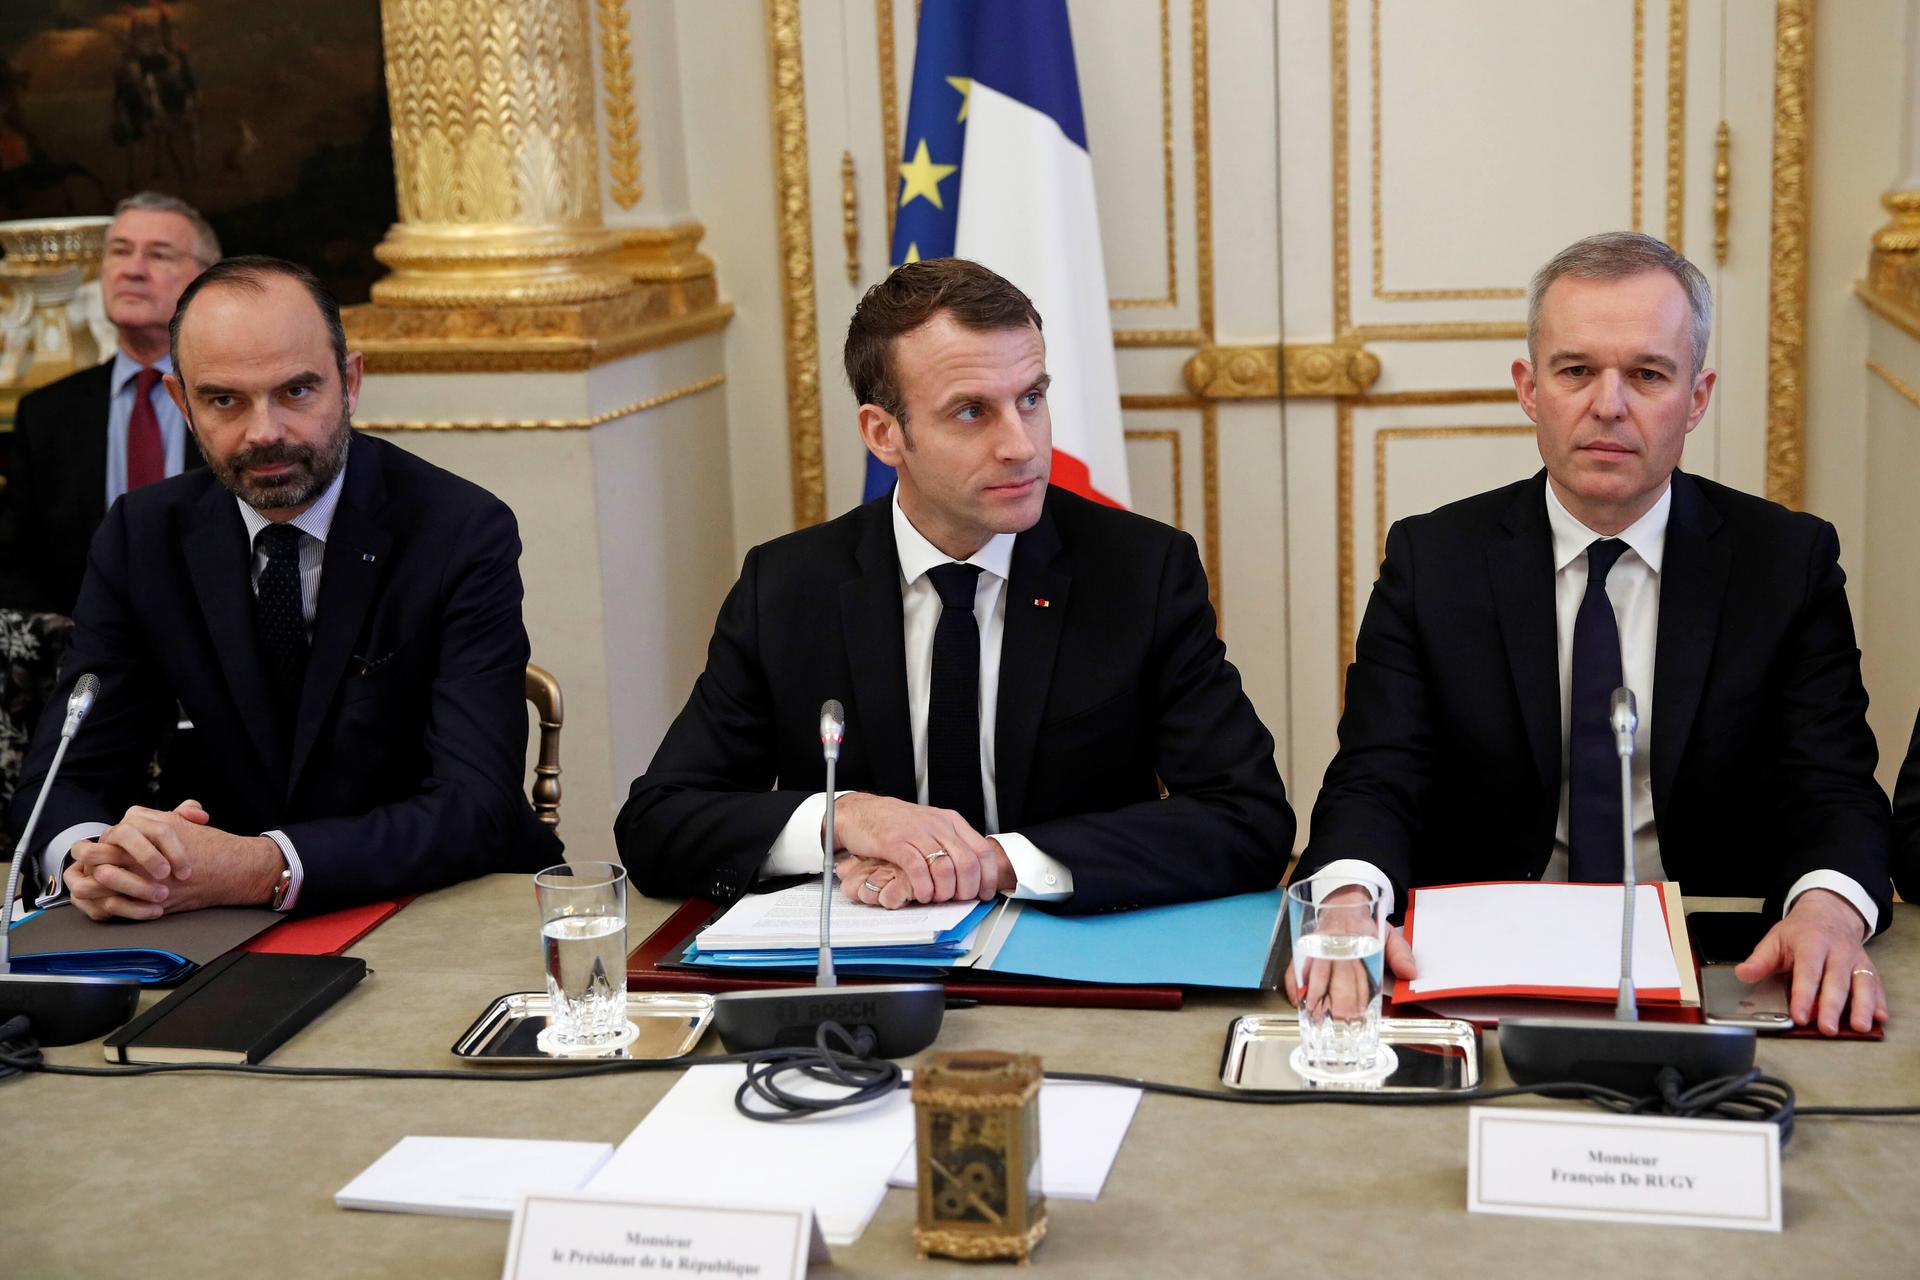 French President Emmanuel Macron, French Prime Minister Edouard Philippe, left, and French Ecology Minister Francois de Rugy dressed in suits and sitting behind a table